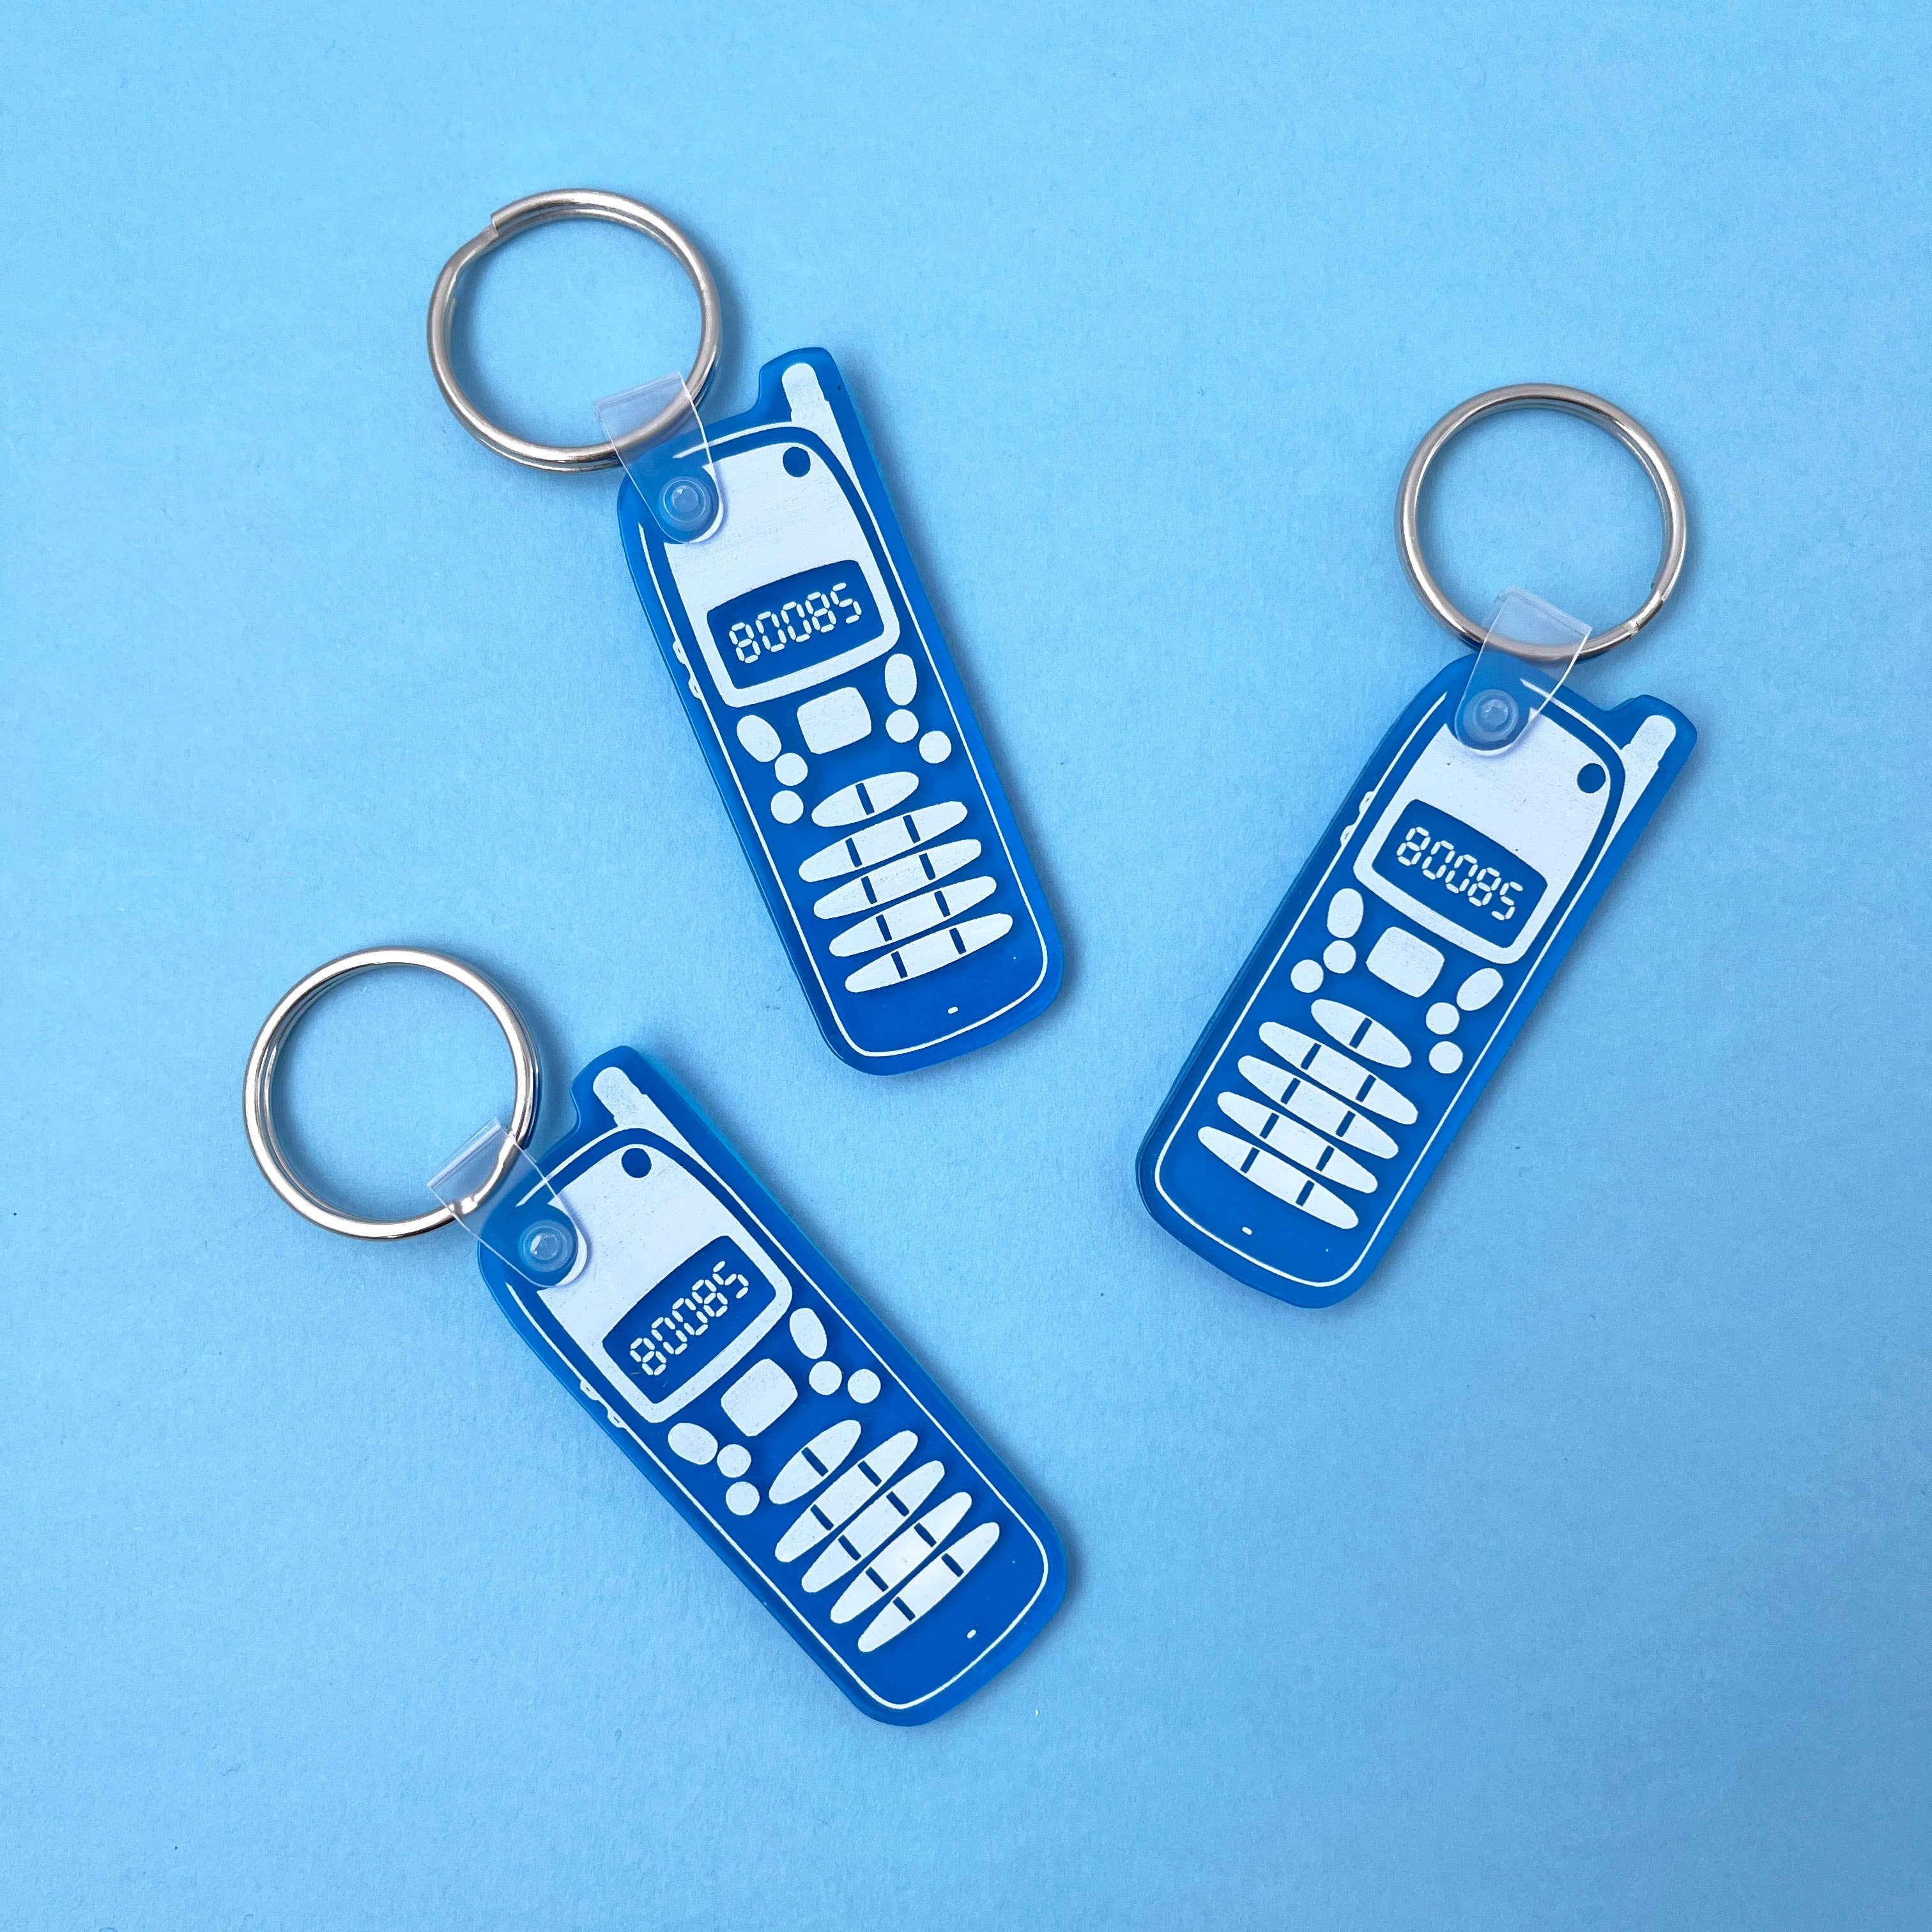 BOOBS Cell Phone Soft Plastic Keychain